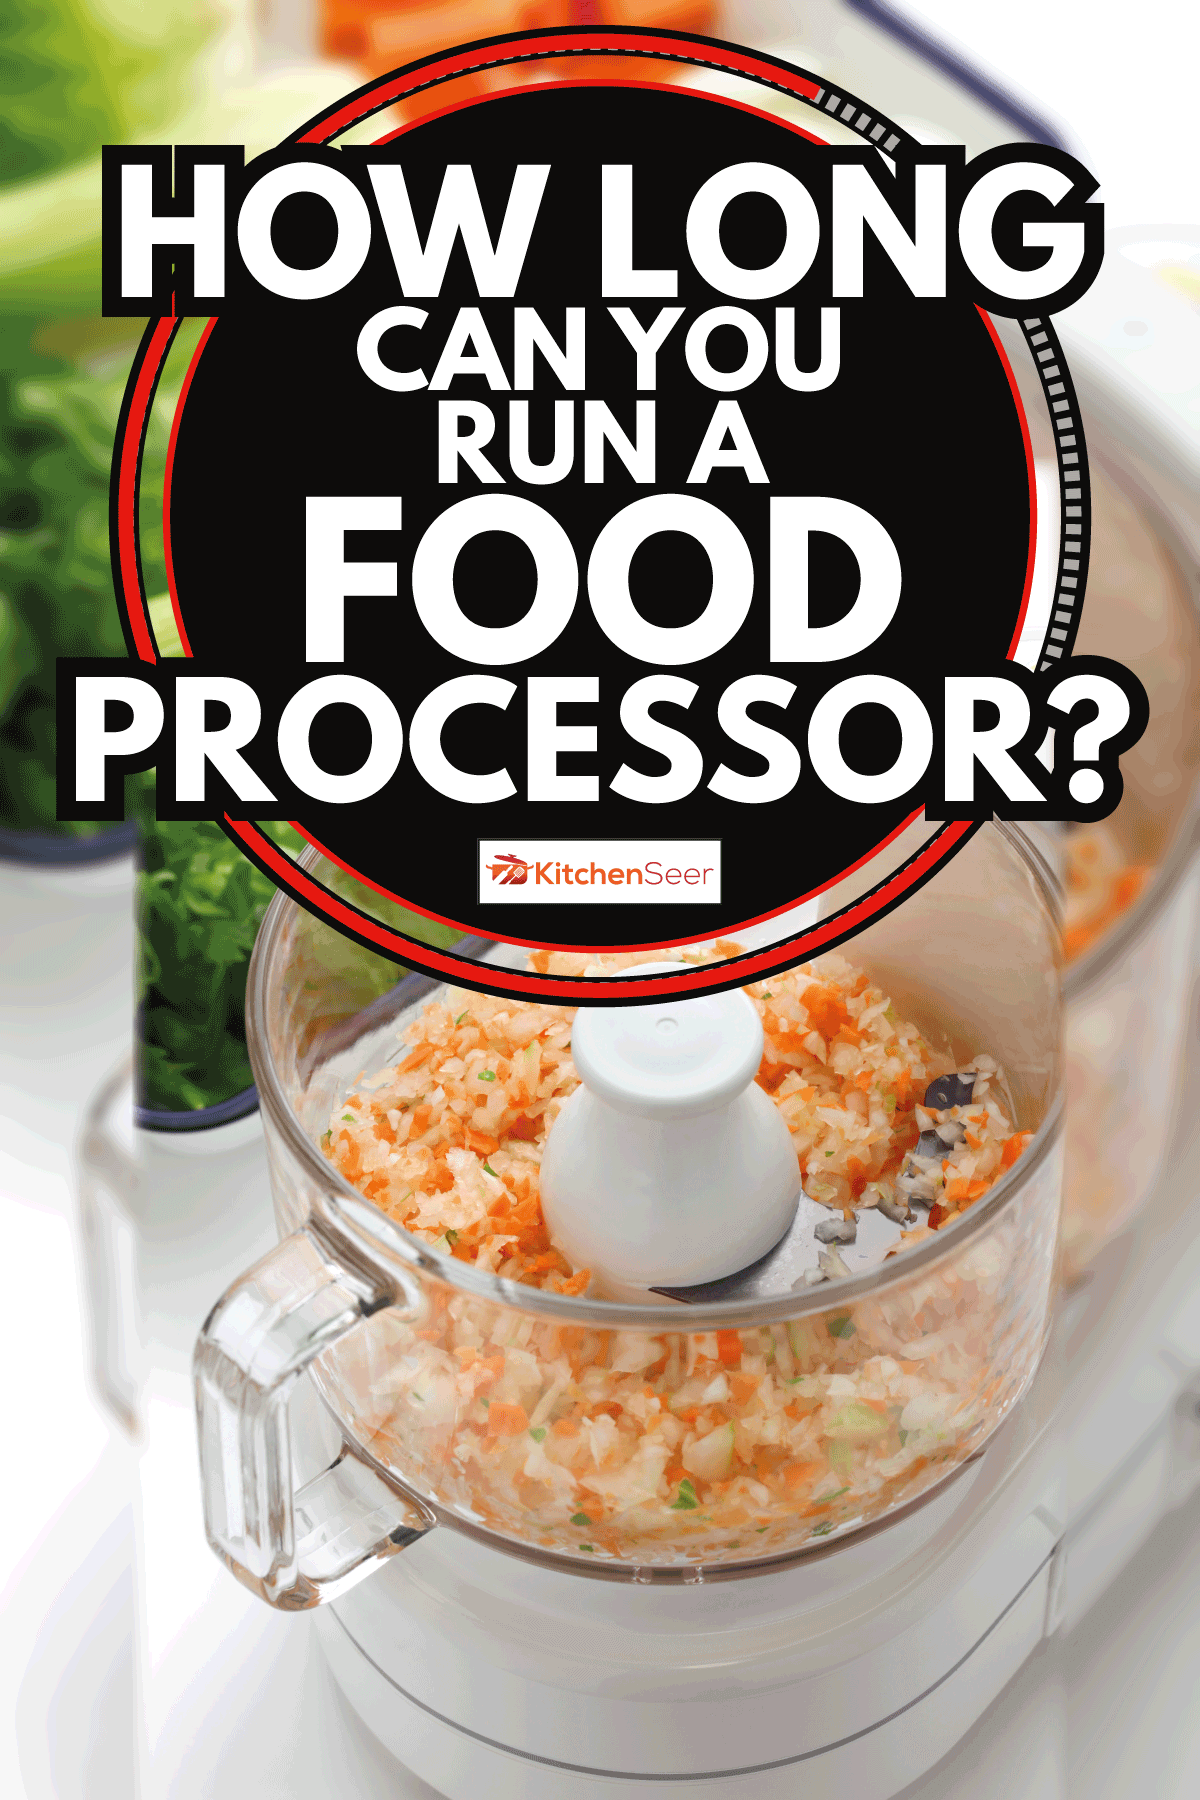 How Long Can You Run A Food Processor